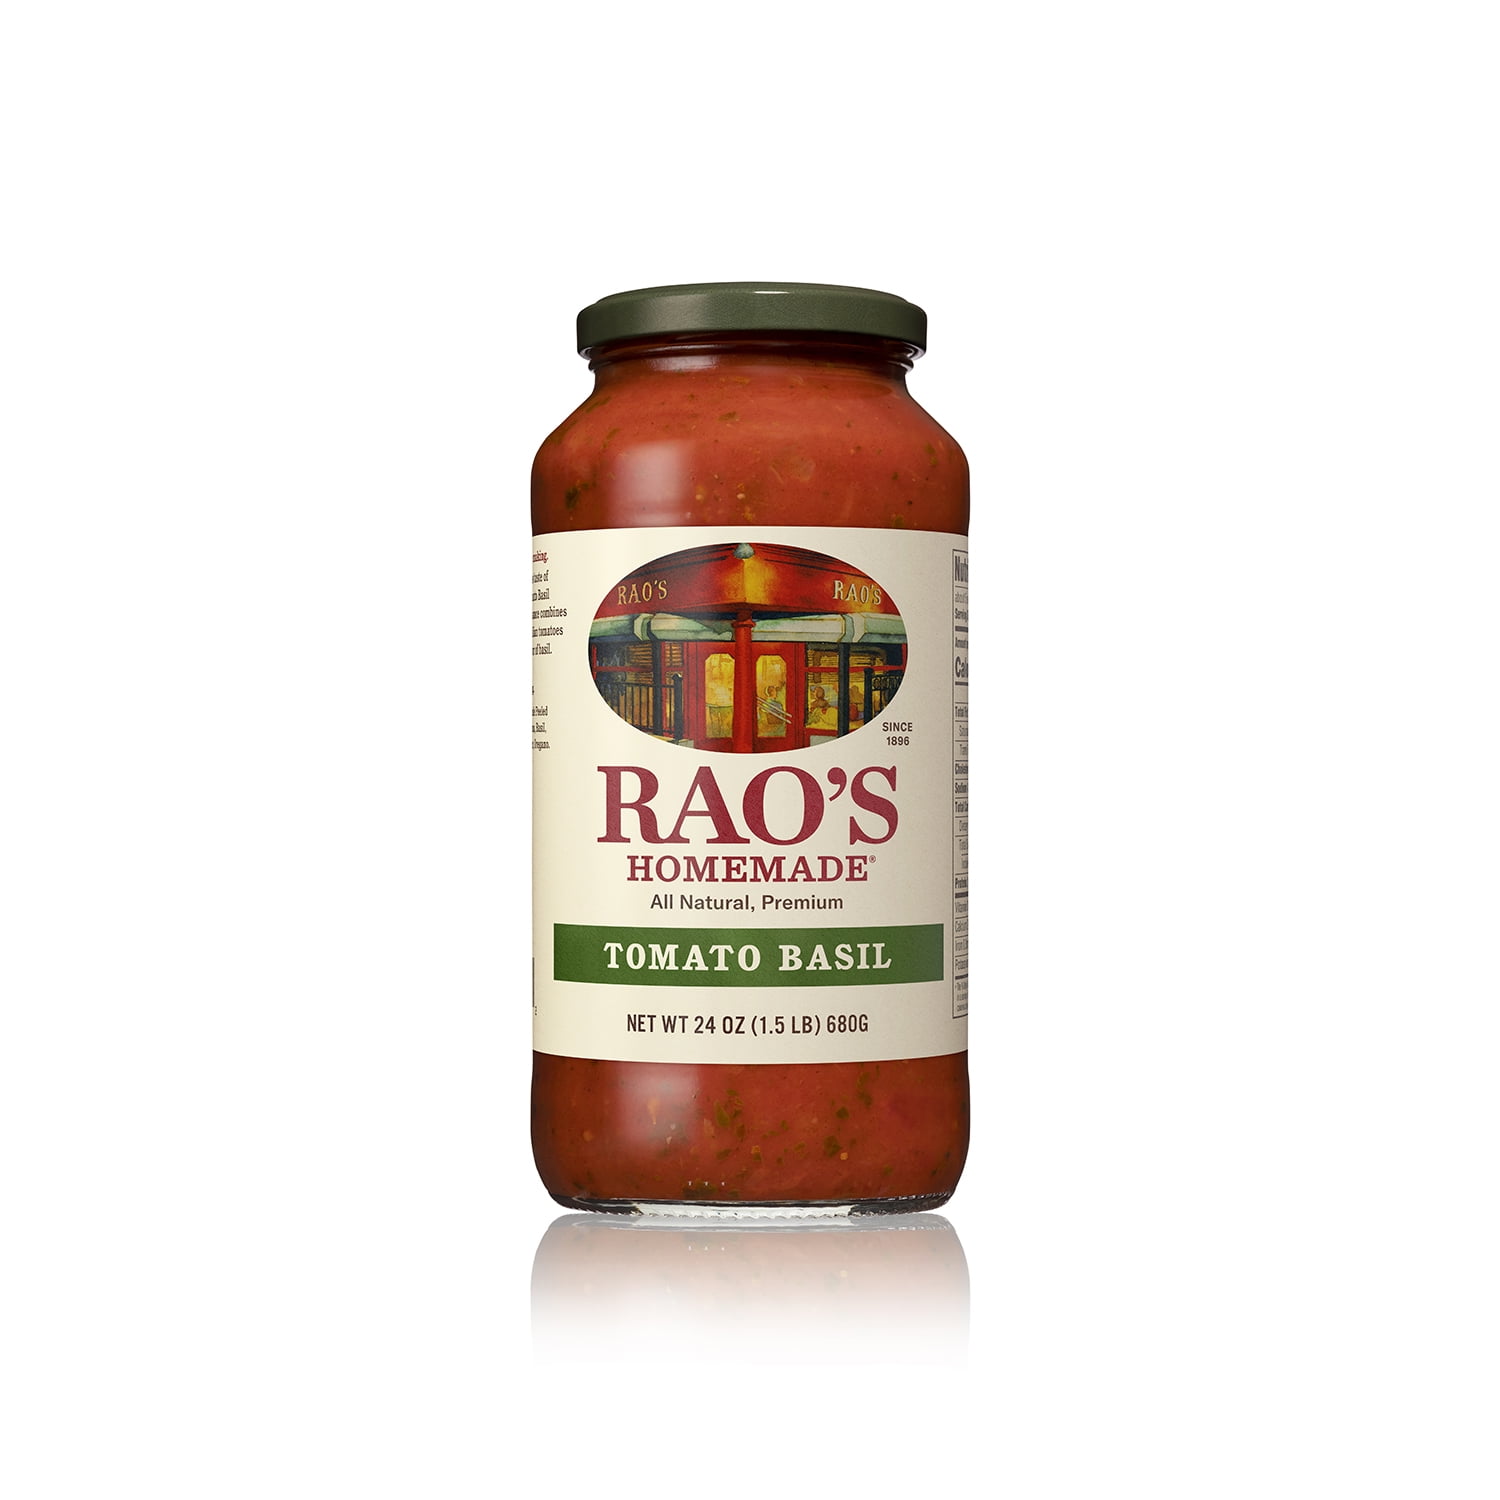 Rao's Homemade Tomato Sauce | Tomato Basil | 24 oz | Versatile Pasta Sauce | Carb Conscious, Keto Friendly | All Natural | Premium Quality | Made with Slow-Simmered Italian Tomatoes & Basil